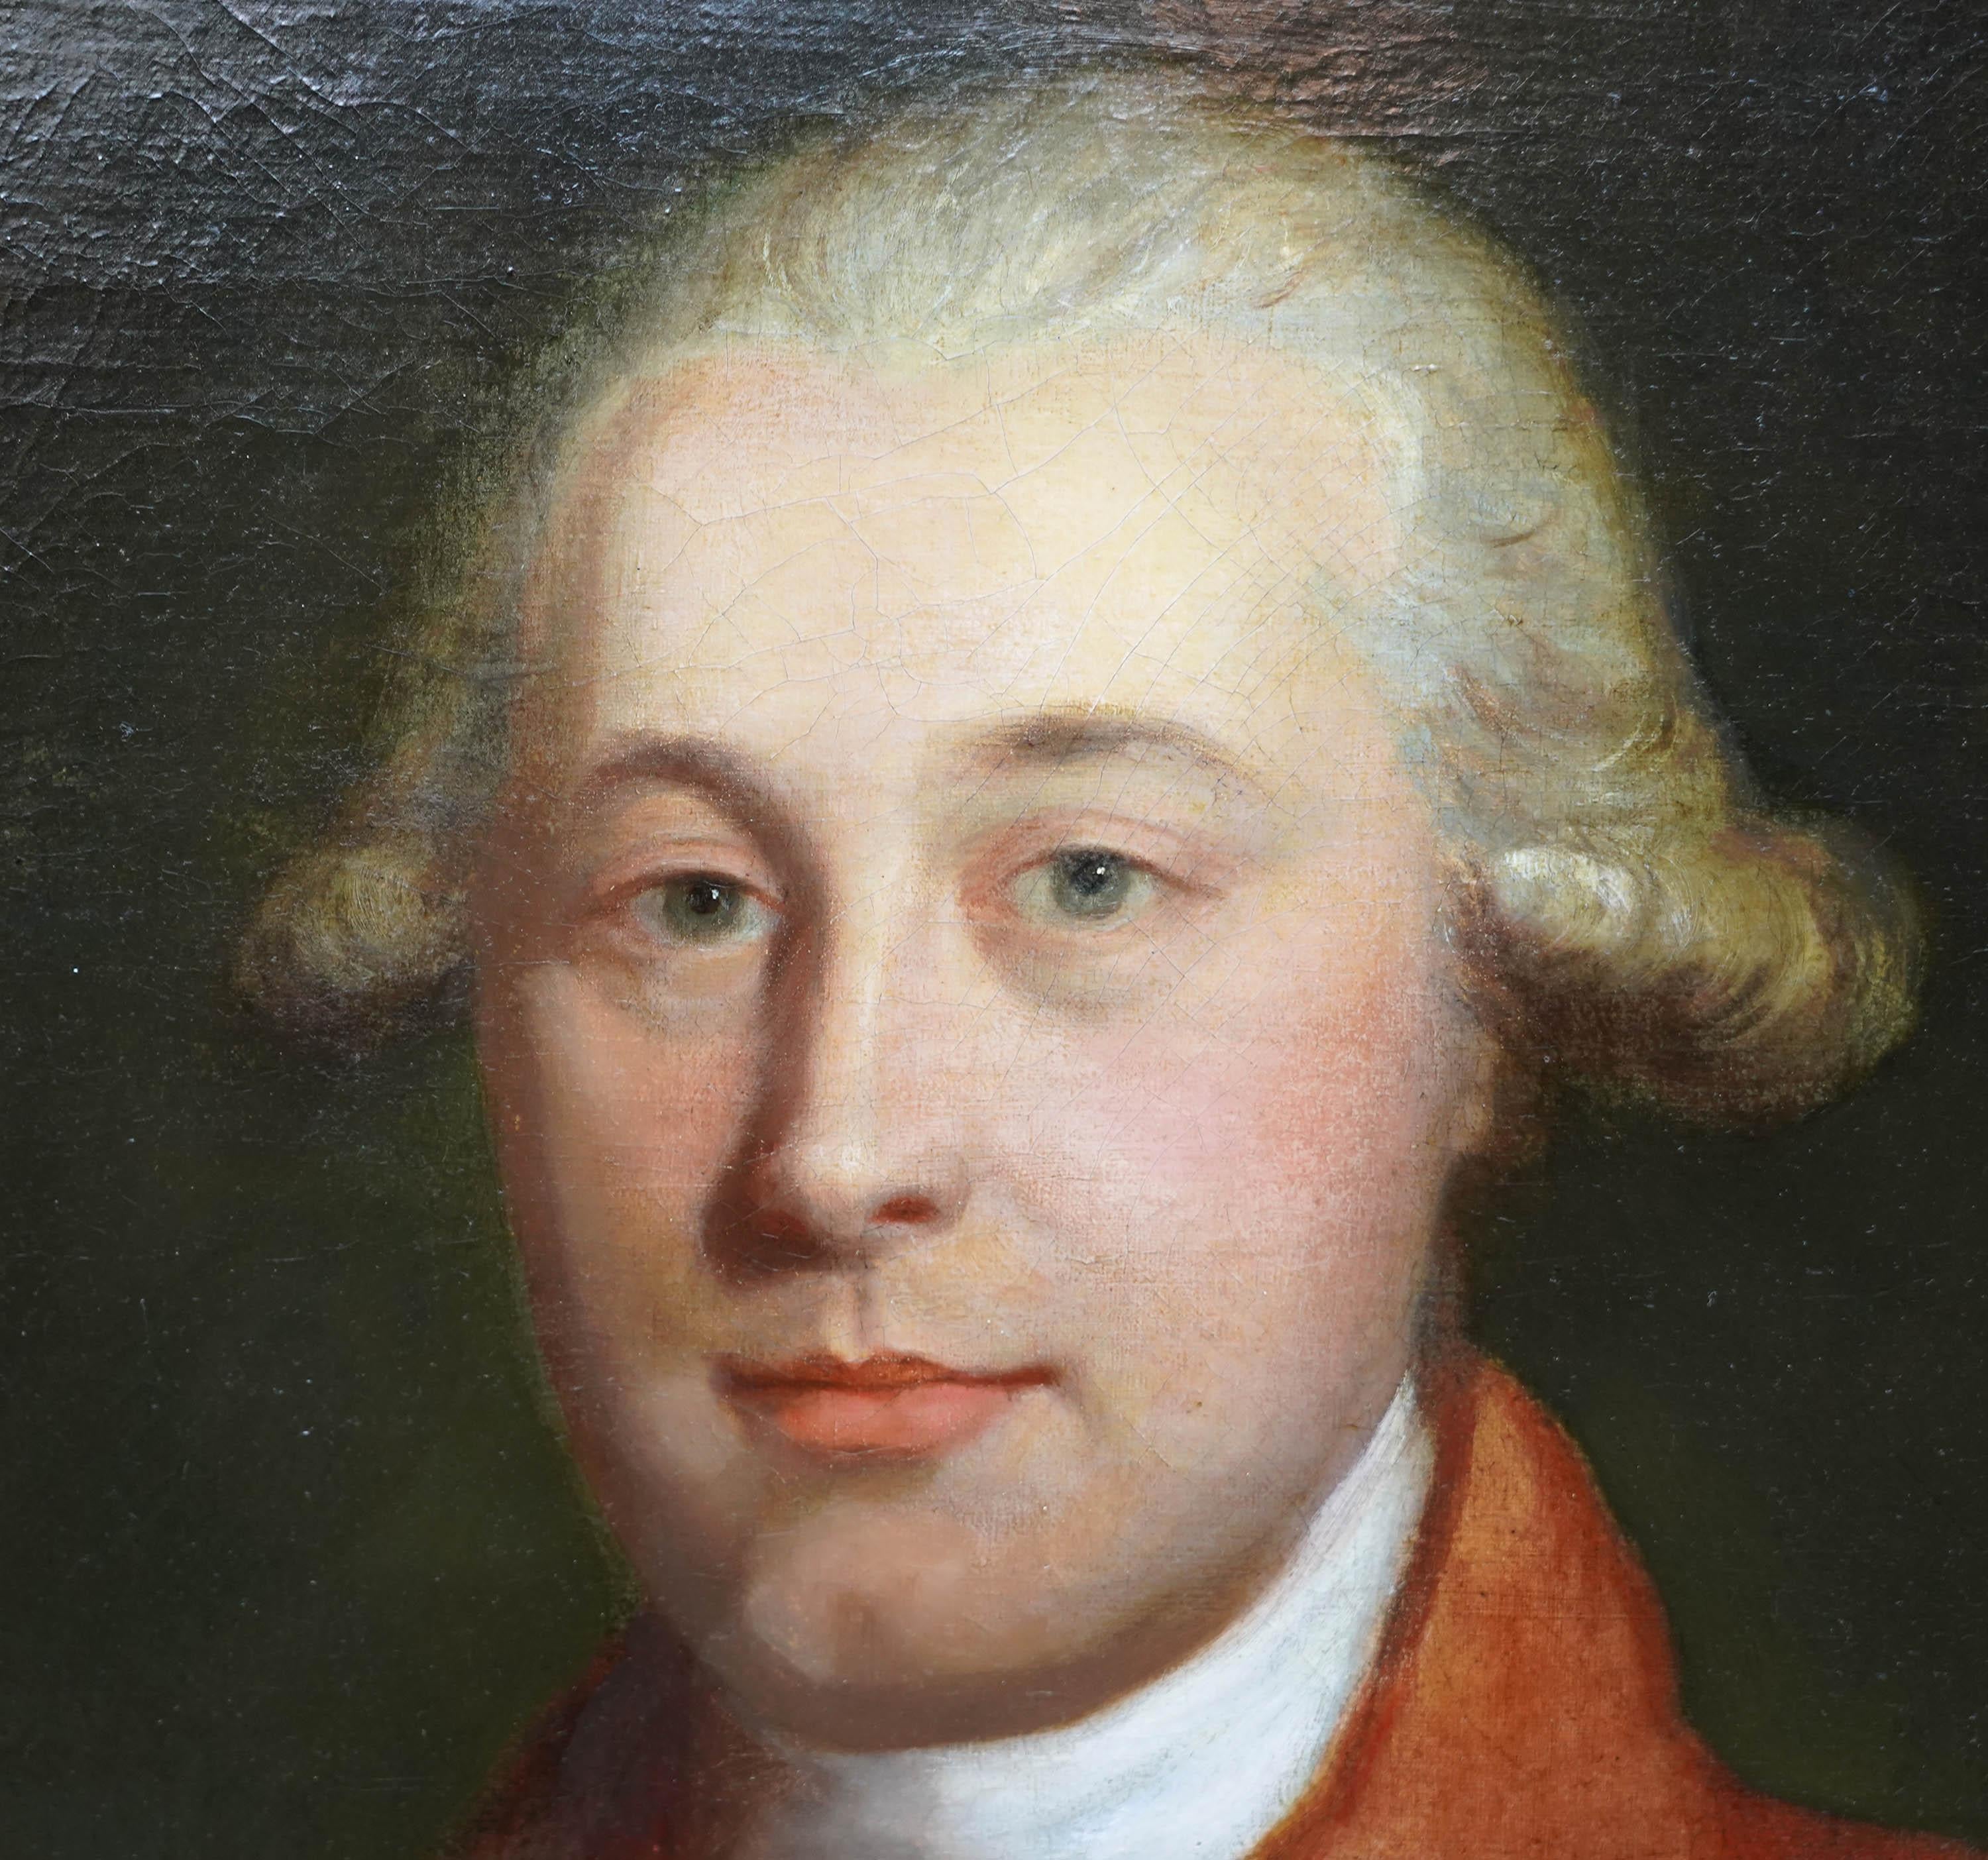 This rather handsome British Old Master portrait oil painting is attributed to circle of Thomas Gainsborough. Painted circa 1780 the sitter is identified on the name plate as Archibald Ogilvy. It is a half length portrait of Ogilvy wearing a red